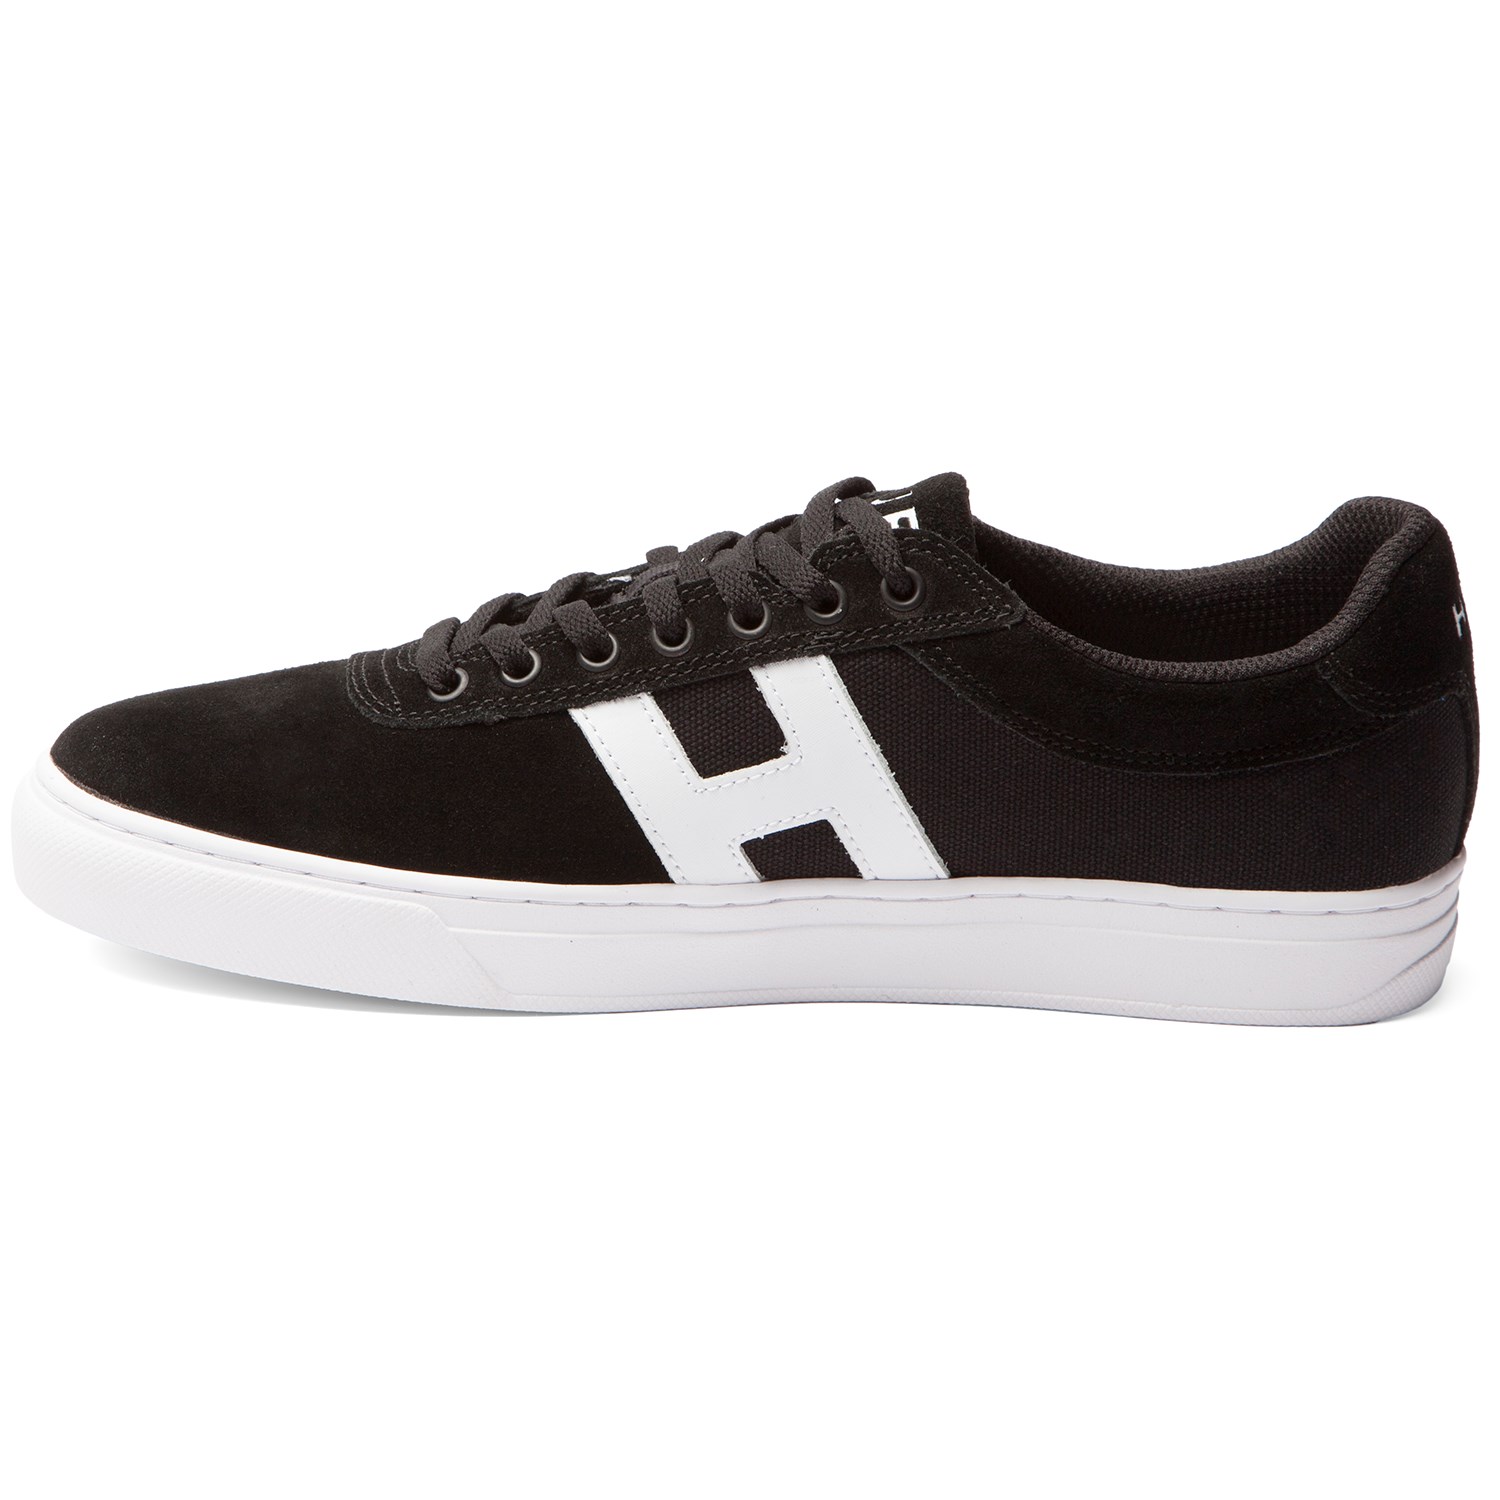 Huf Worldwide Footwear Skate Chaussures Shoes Soto Olive Suede 8/40 5 